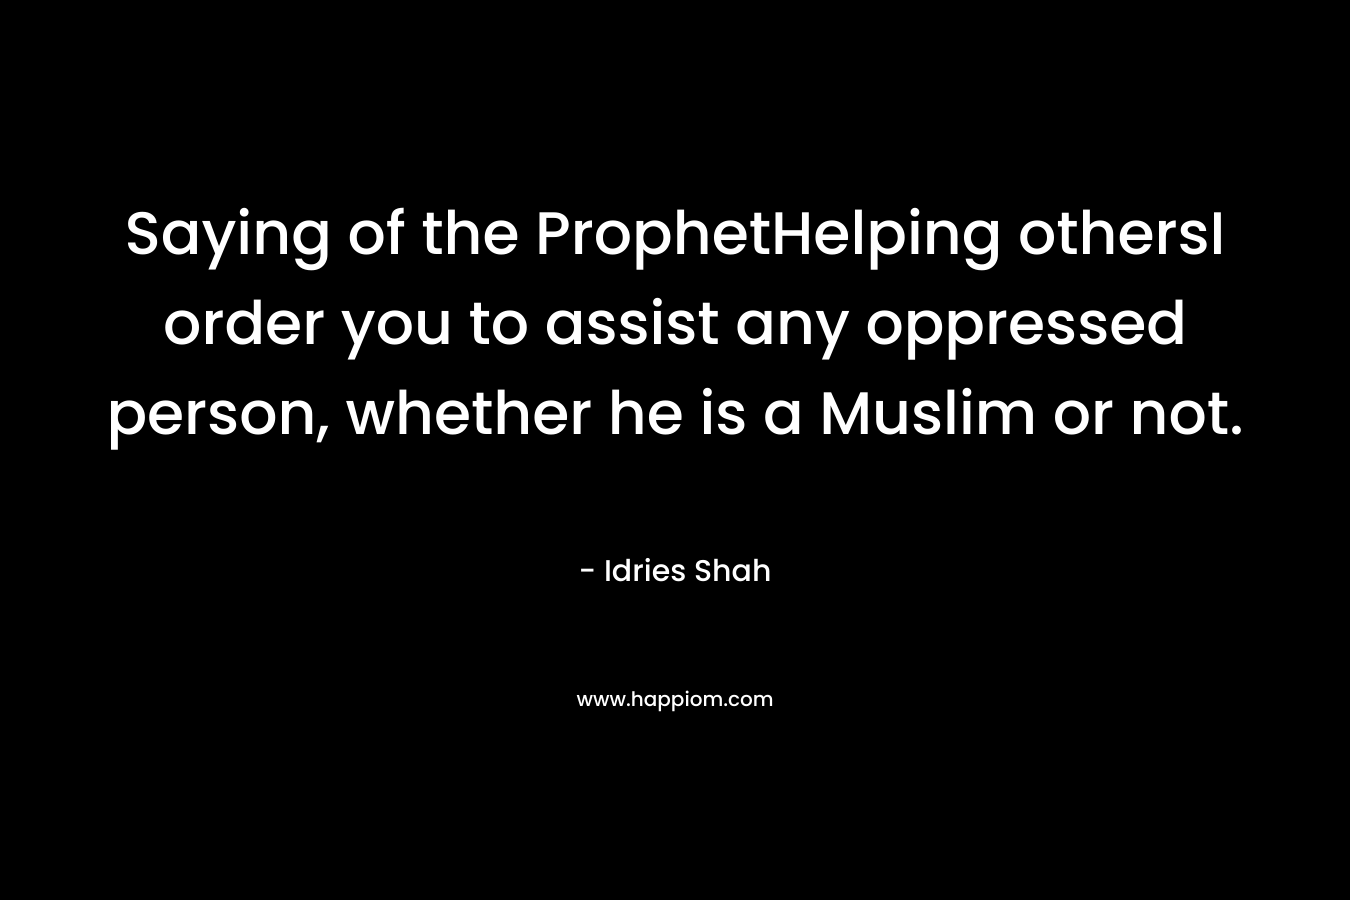 Saying of the ProphetHelping othersI order you to assist any oppressed person, whether he is a Muslim or not.